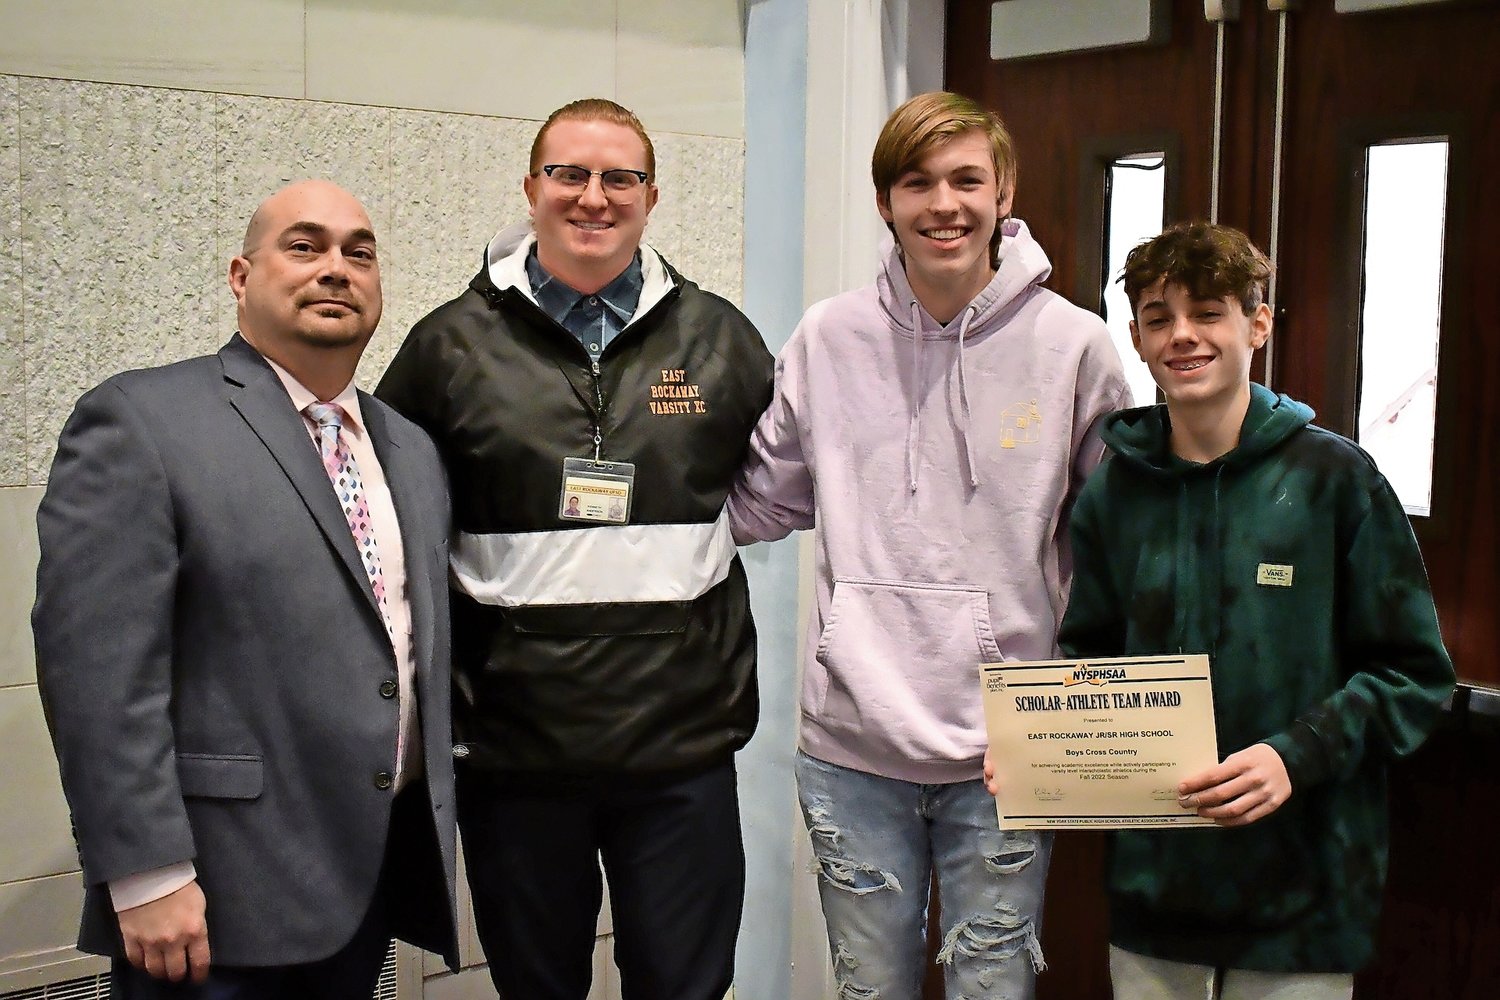 Members of East Rockaway Jr./Sr. High School boys’ soccer team were honored as a Scholar-Athlete team with Athletic Director Gary Gregory.